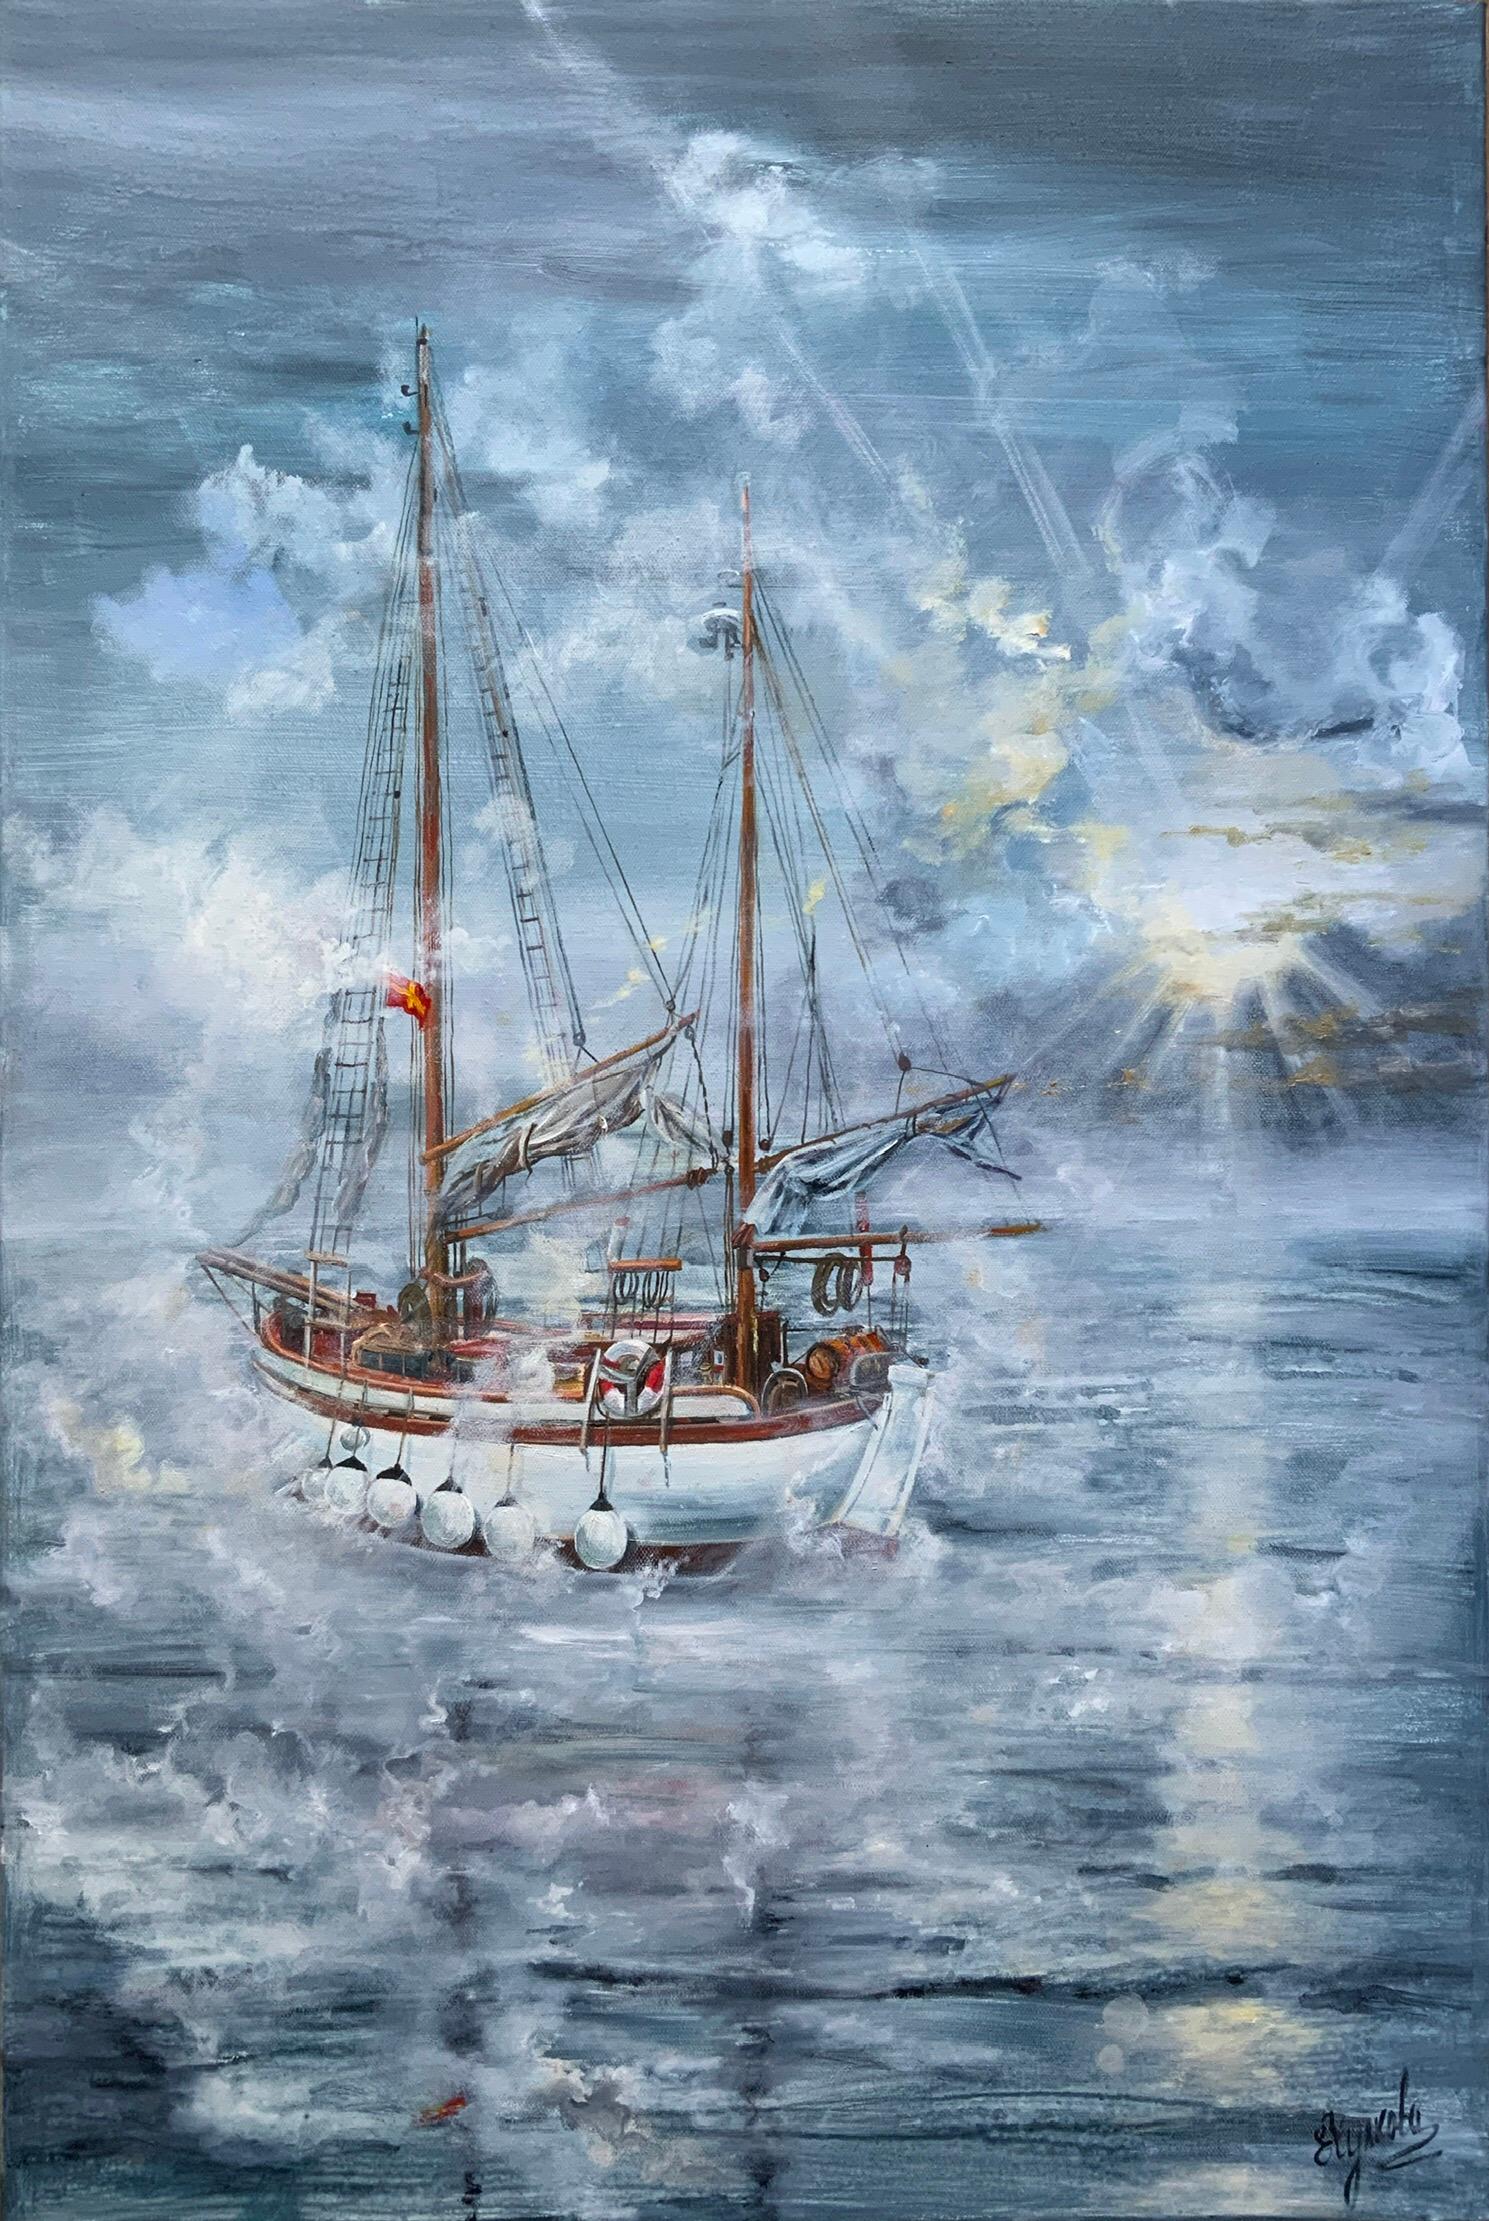  My Ship (Ship and Clouds) - Painting by Chulkova Elena